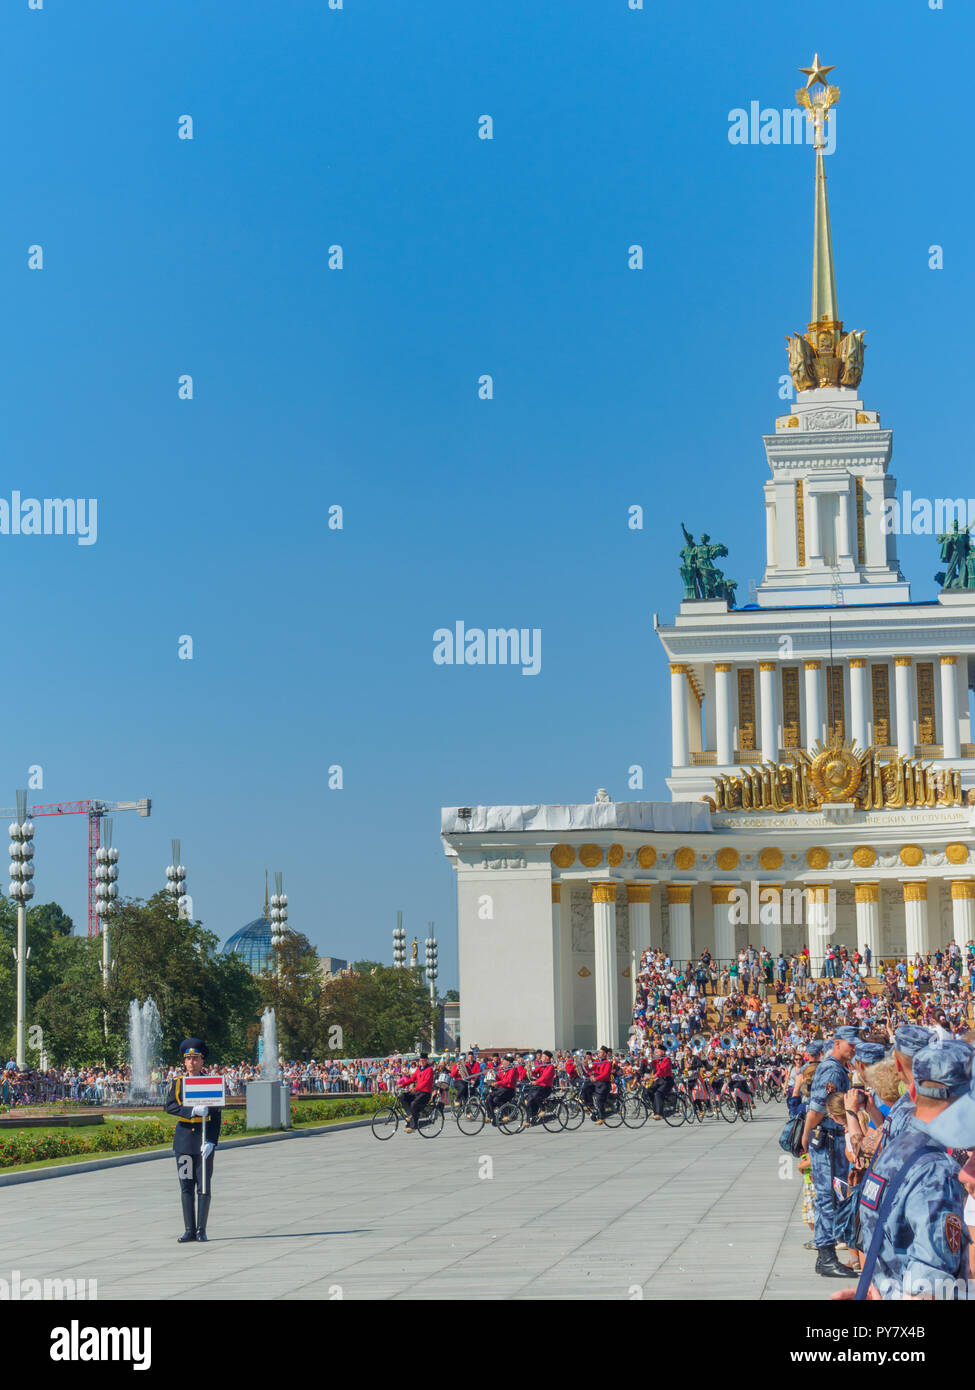 MOSCOW, RUSSIA - AUGUST 25, 2018: The festive procession of the Spasskaya Tower International Military Music Festival participants at VDNKH. Stock Photo